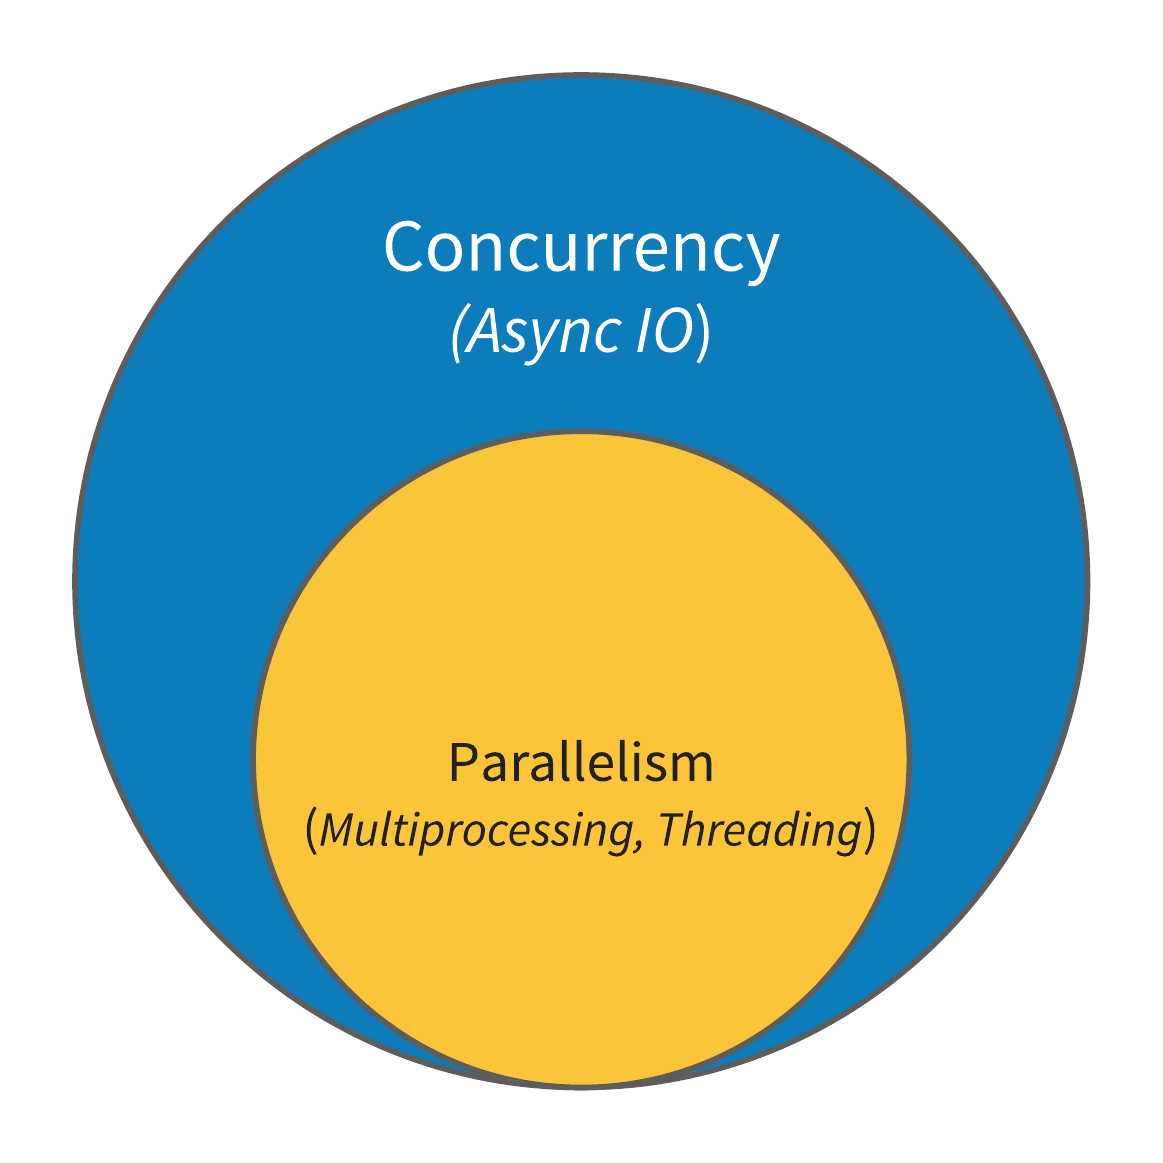 Concurrency vs Threading vs Parallelism vs Multiprocessing